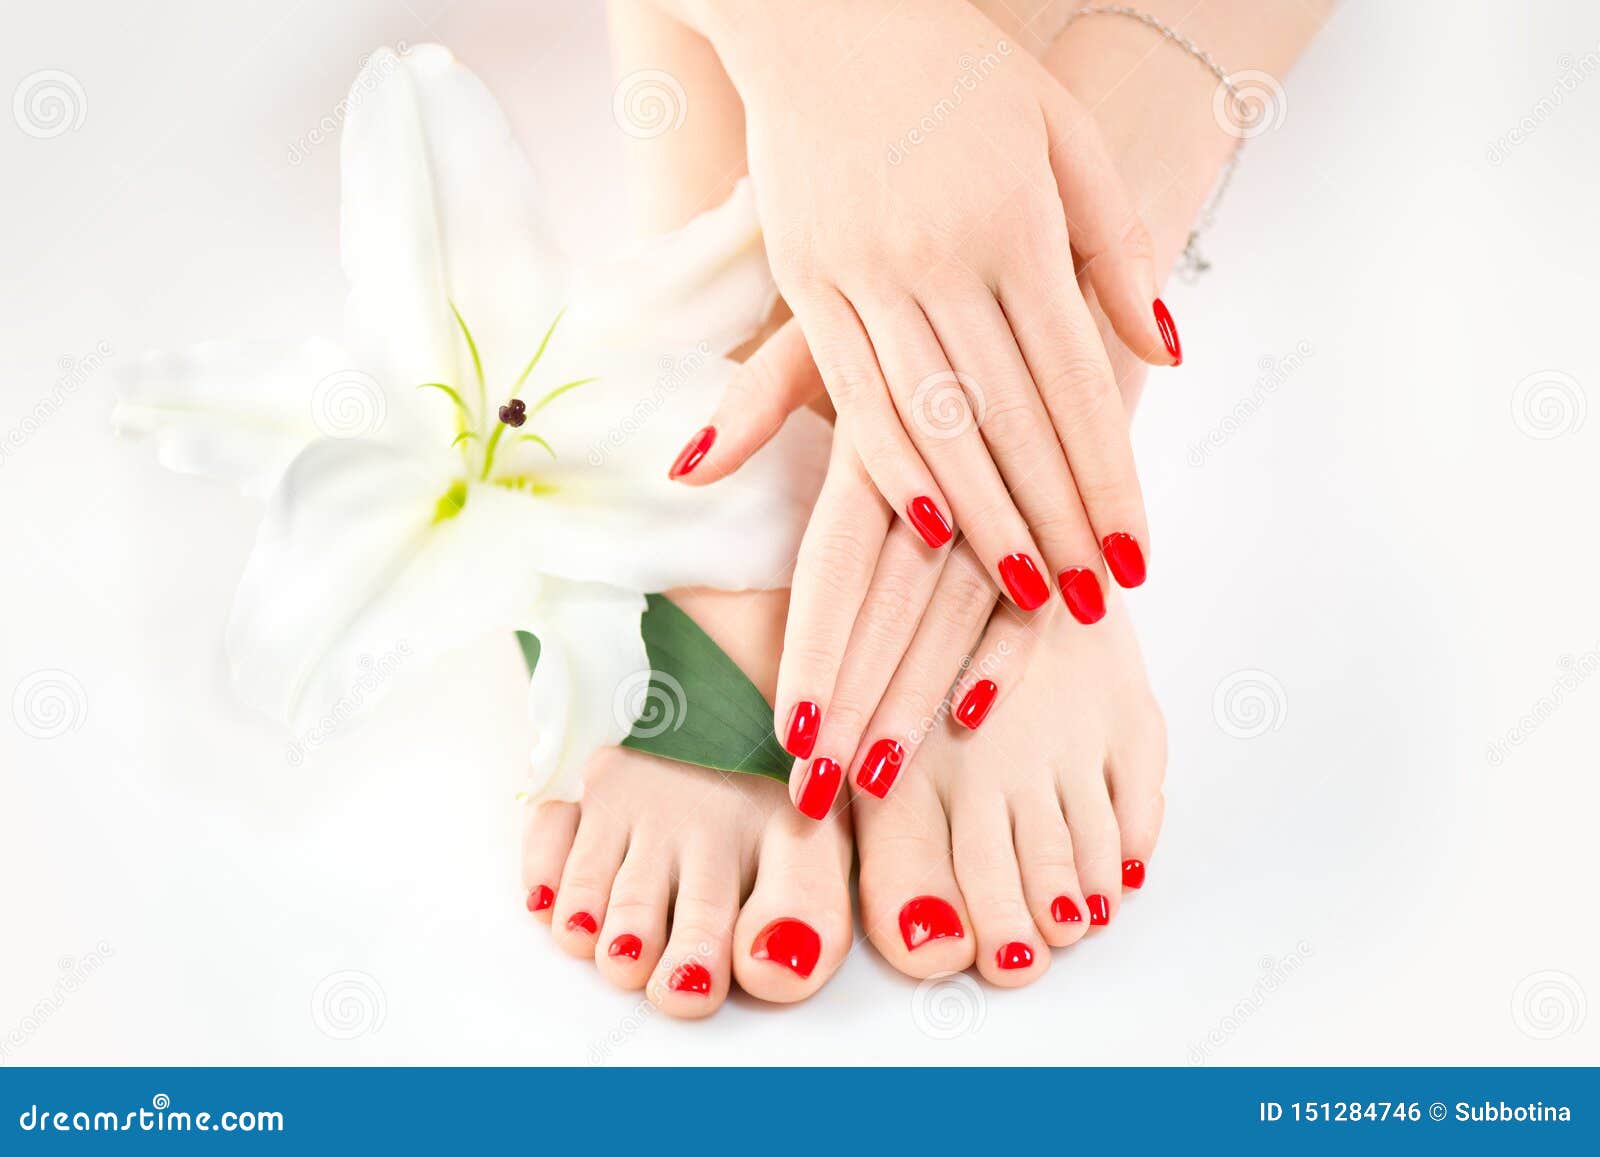 manicure and pedicure in spa salon. skincare. healthy female hands and legs with beautiful nails